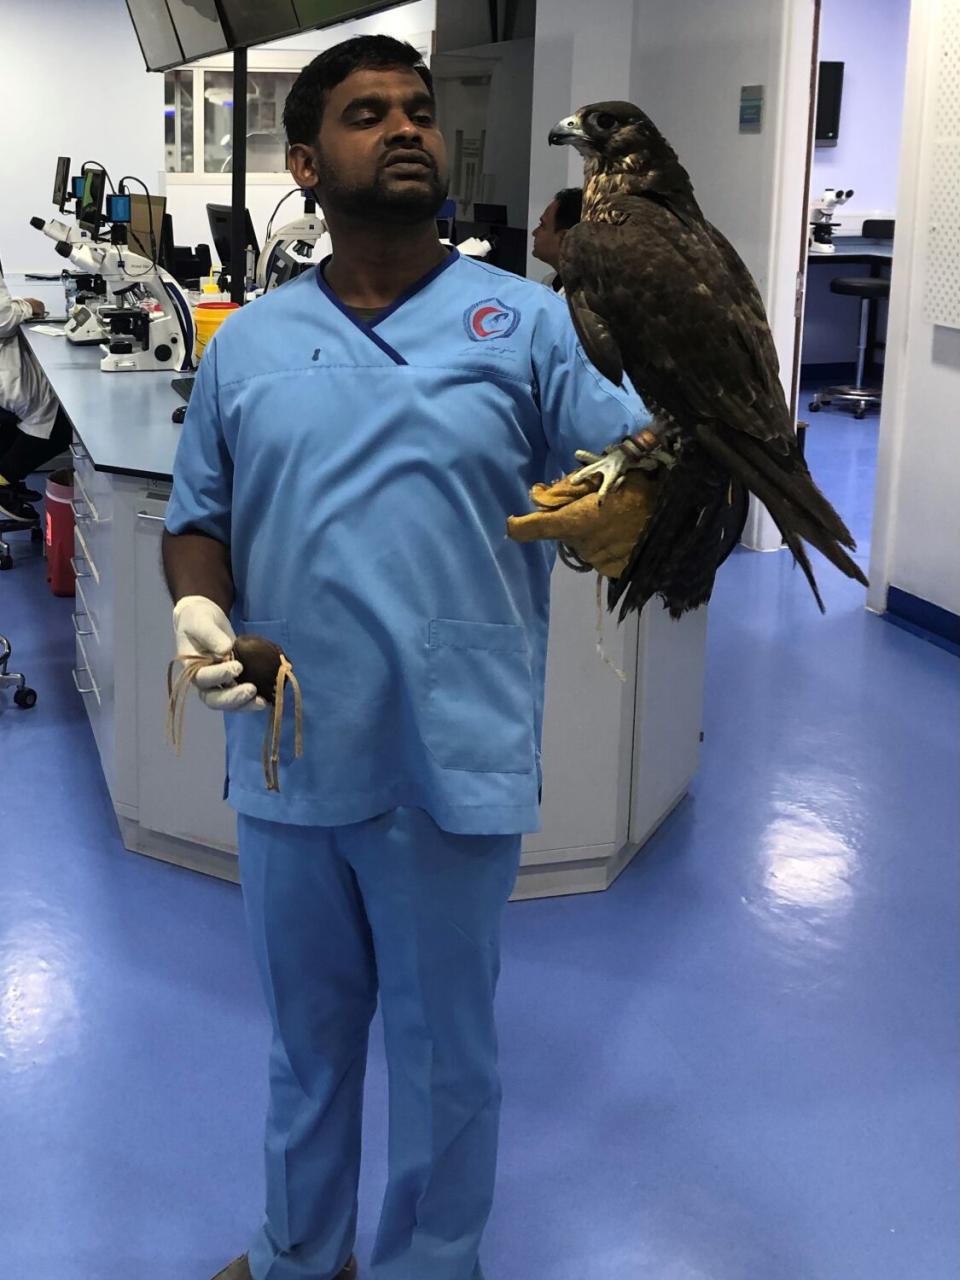 A doctor at the Souq Waqif Falcon Hospital in Doha, Qatar, examines a Falcon on his arm.